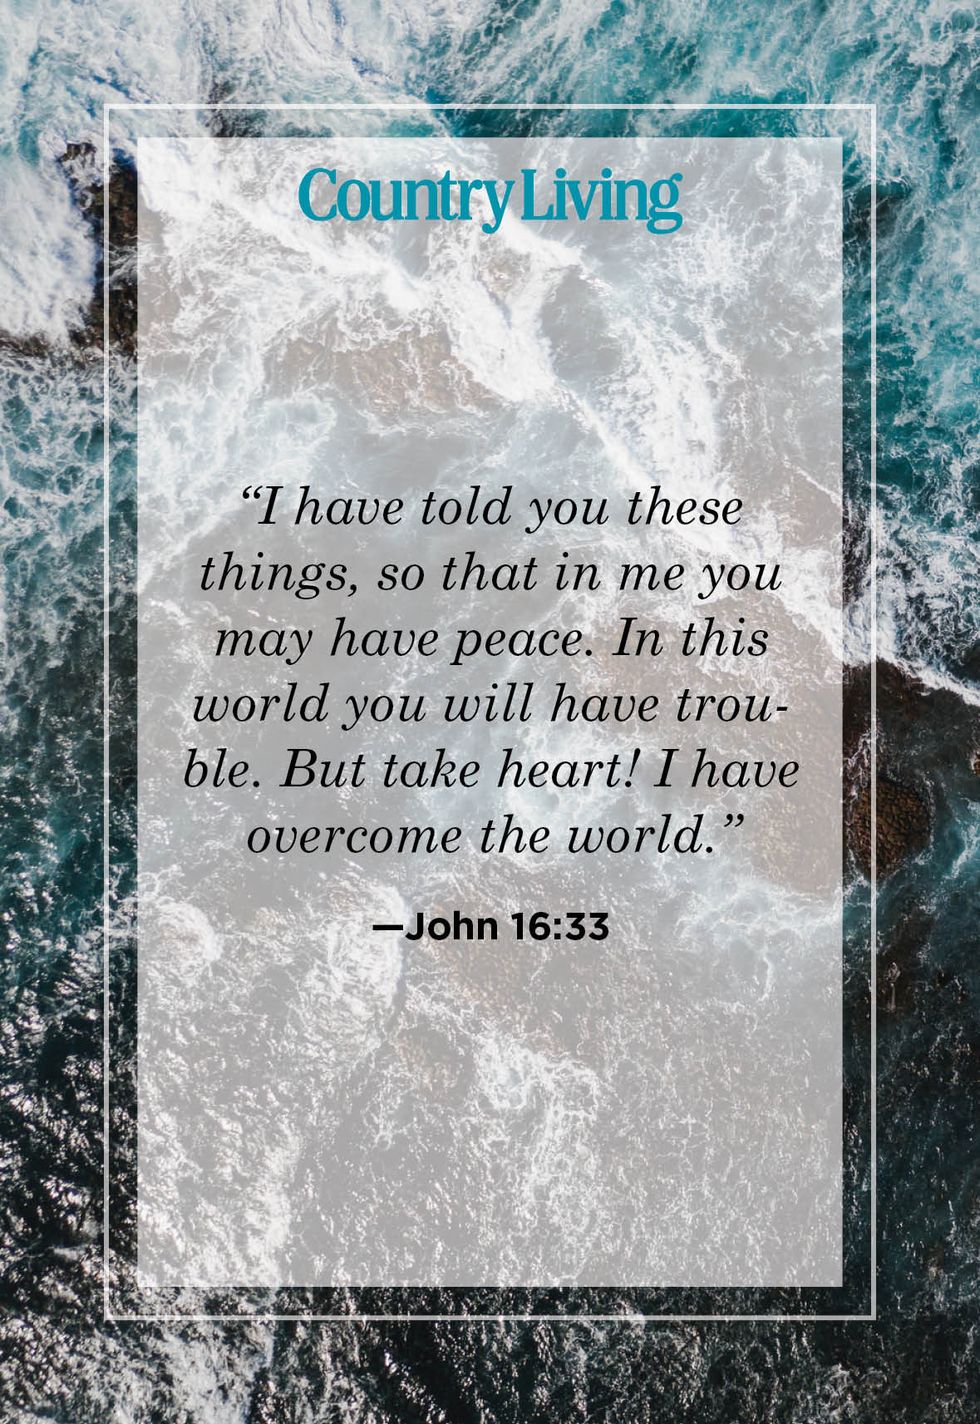 i have told you these things so that in me you may have peace in this world you will have trouble but take heart i have overcome the world from john sixteen